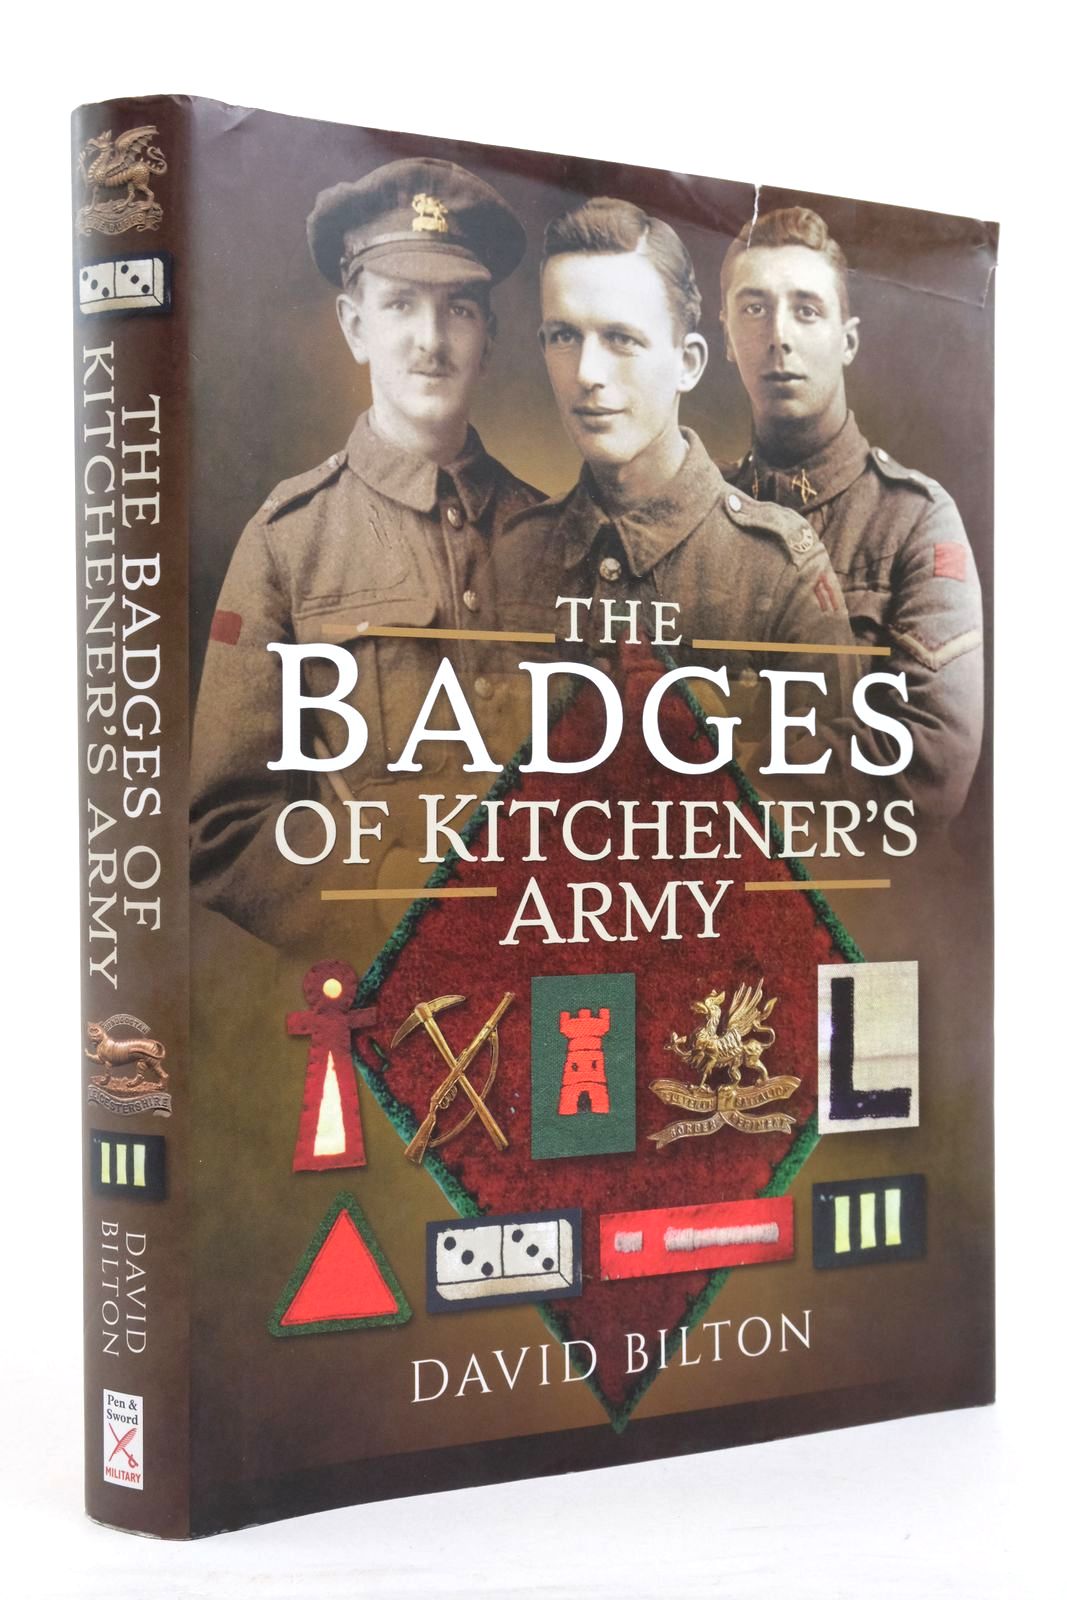 Photo of THE BADGES OF KITCHENER'S ARMY - INFANTRY written by Bilton, David published by Pen &amp; Sword Military (STOCK CODE: 2138362)  for sale by Stella & Rose's Books